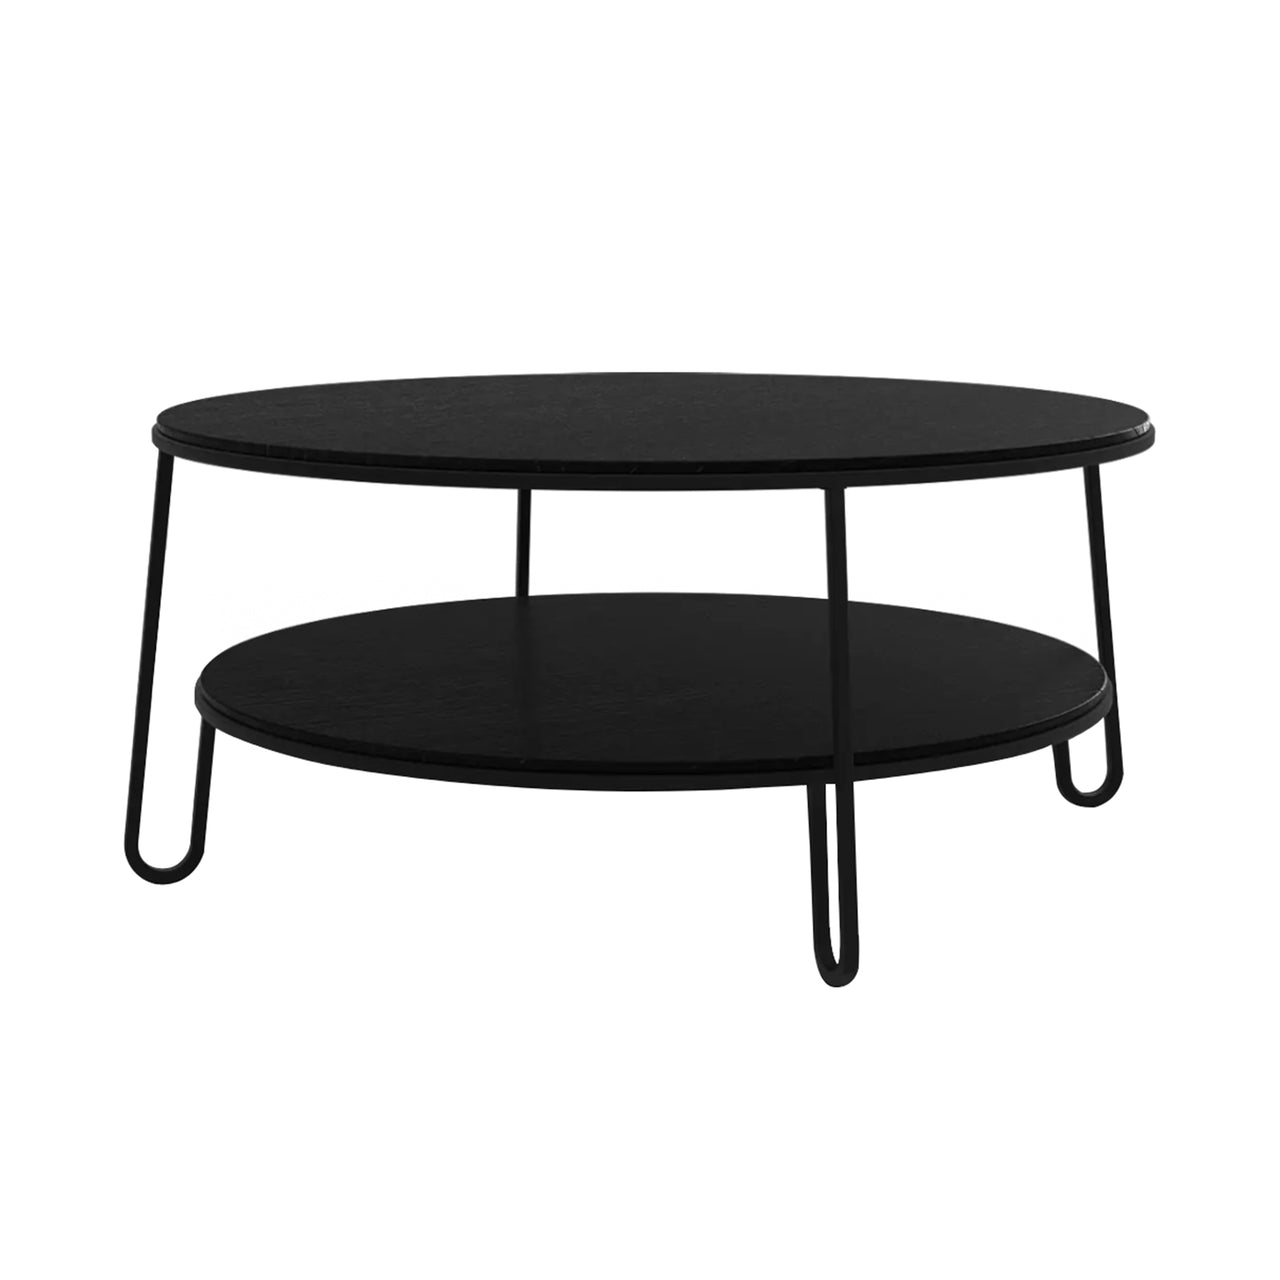 Eugenie Table: Large - 35.4